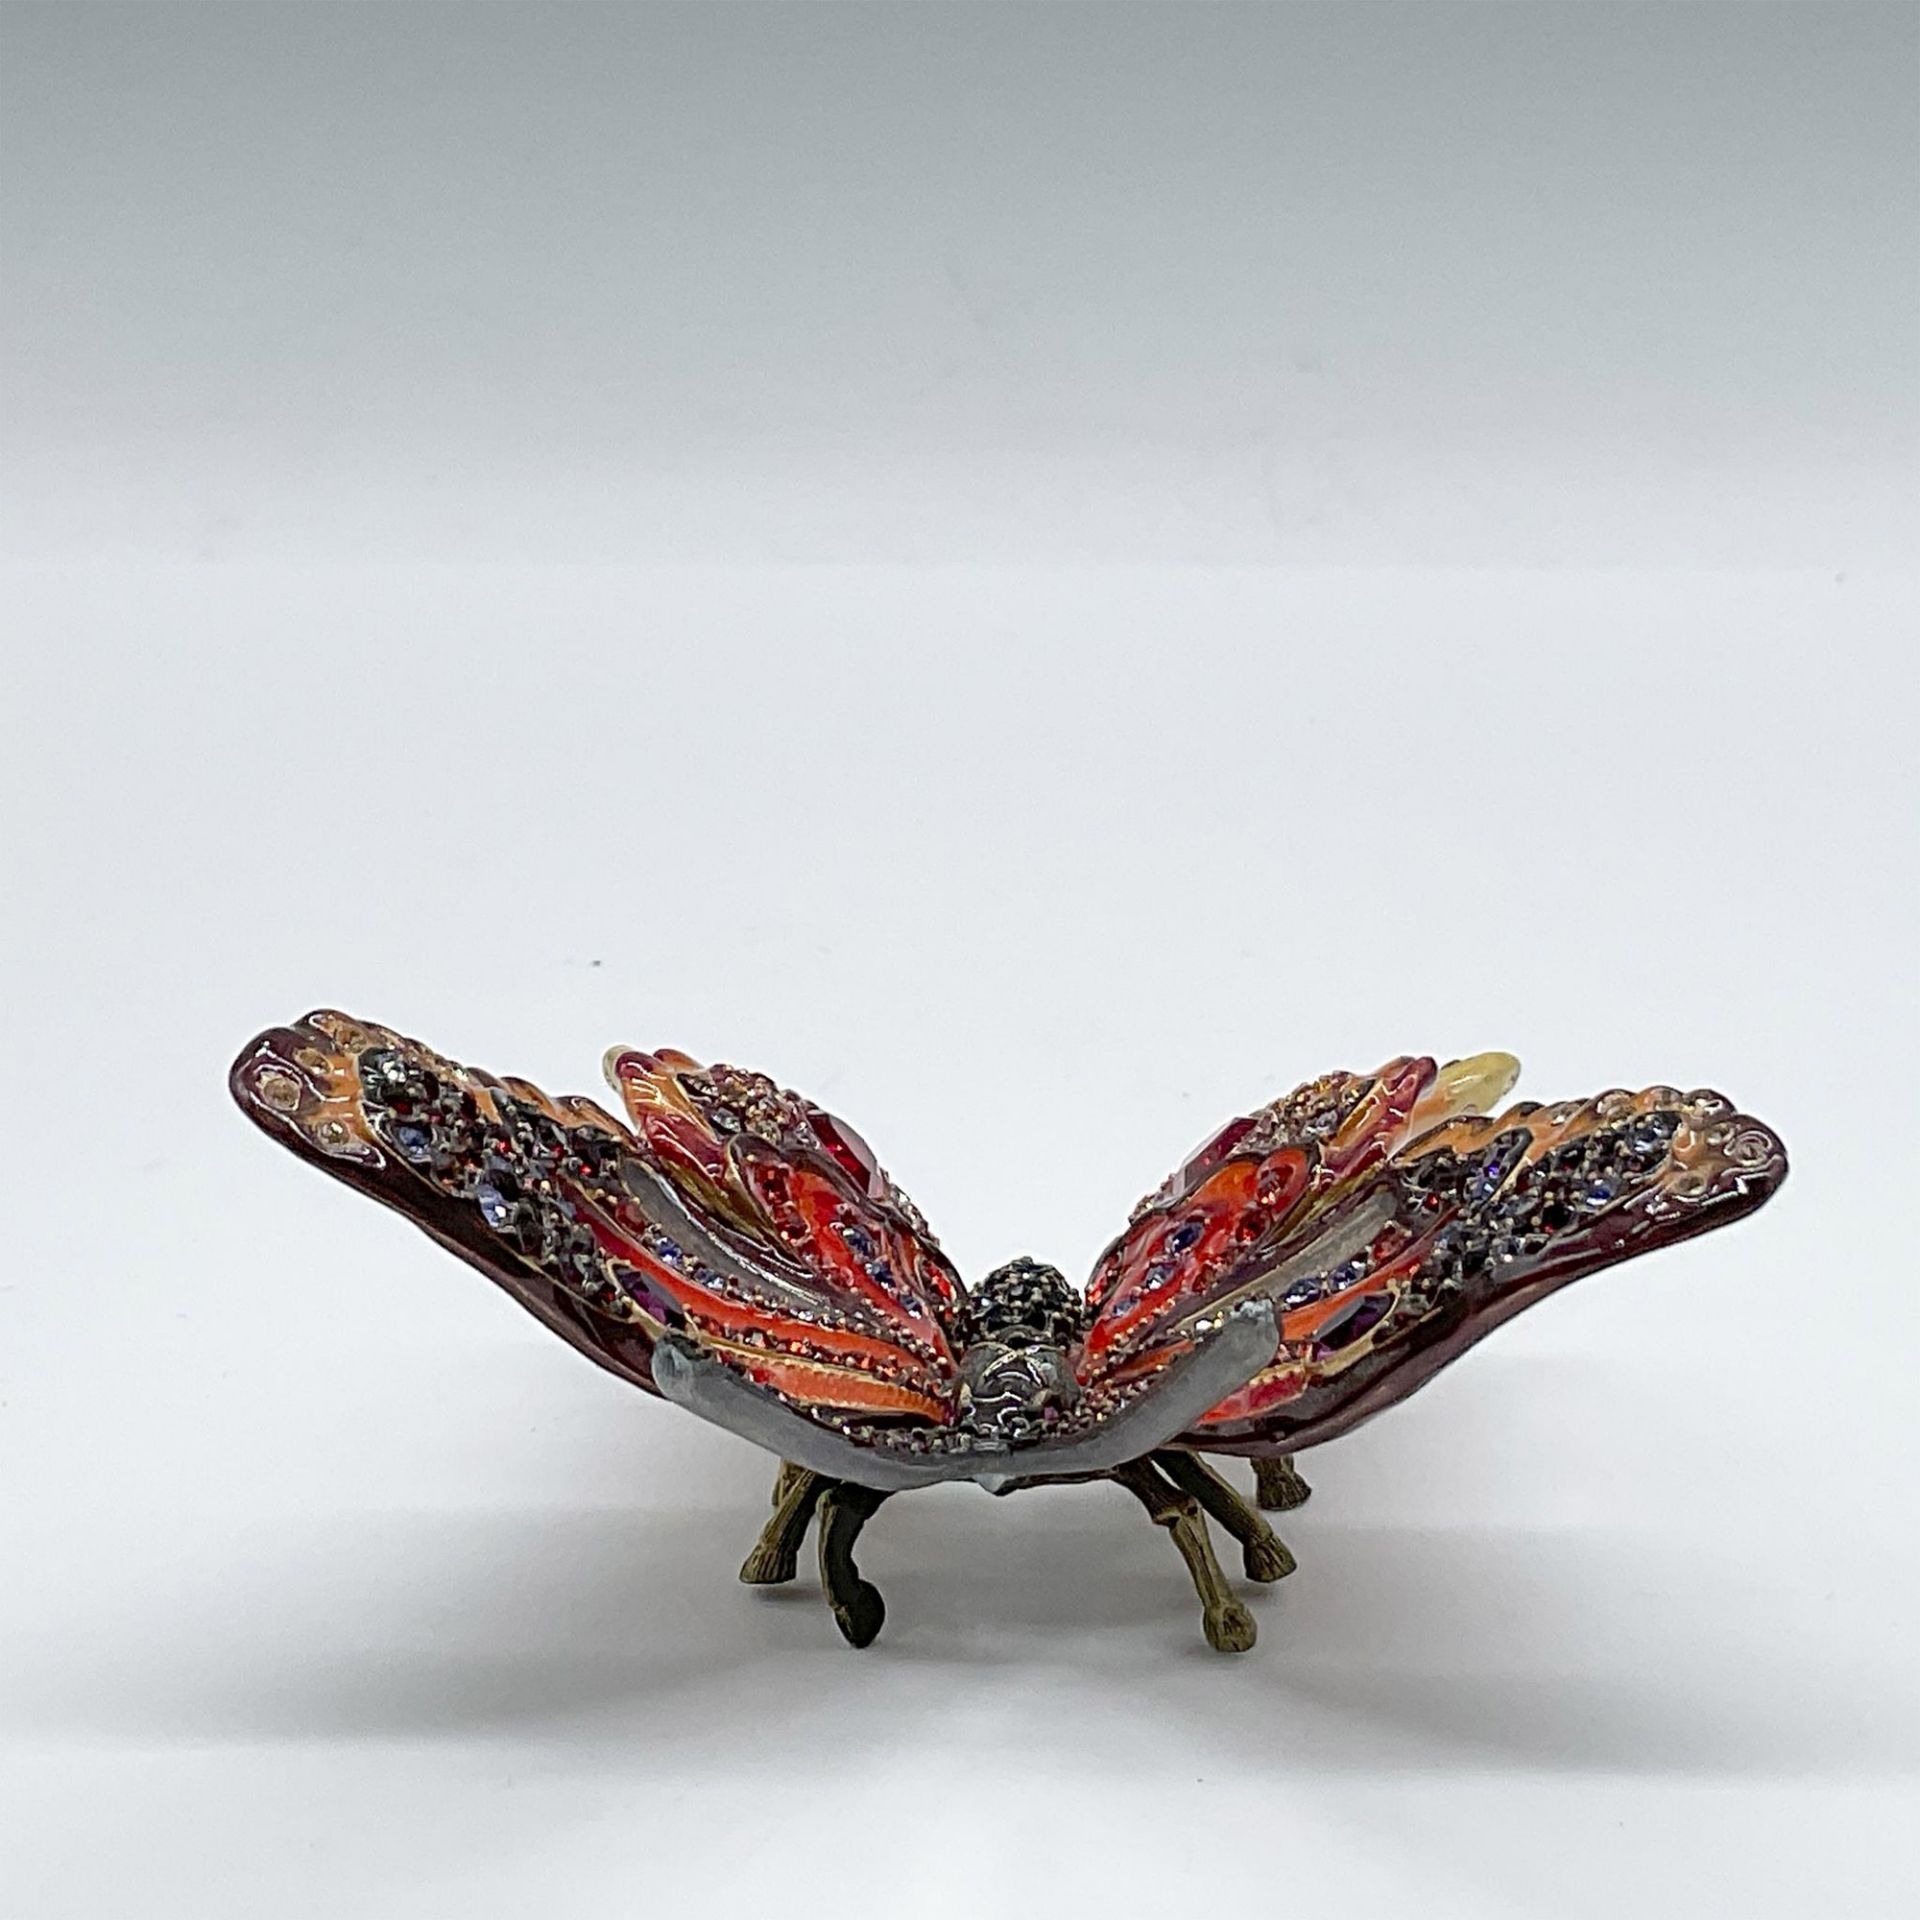 Jay Strongwater and Swarovski Embellished Butterfly Figurine - Image 2 of 3